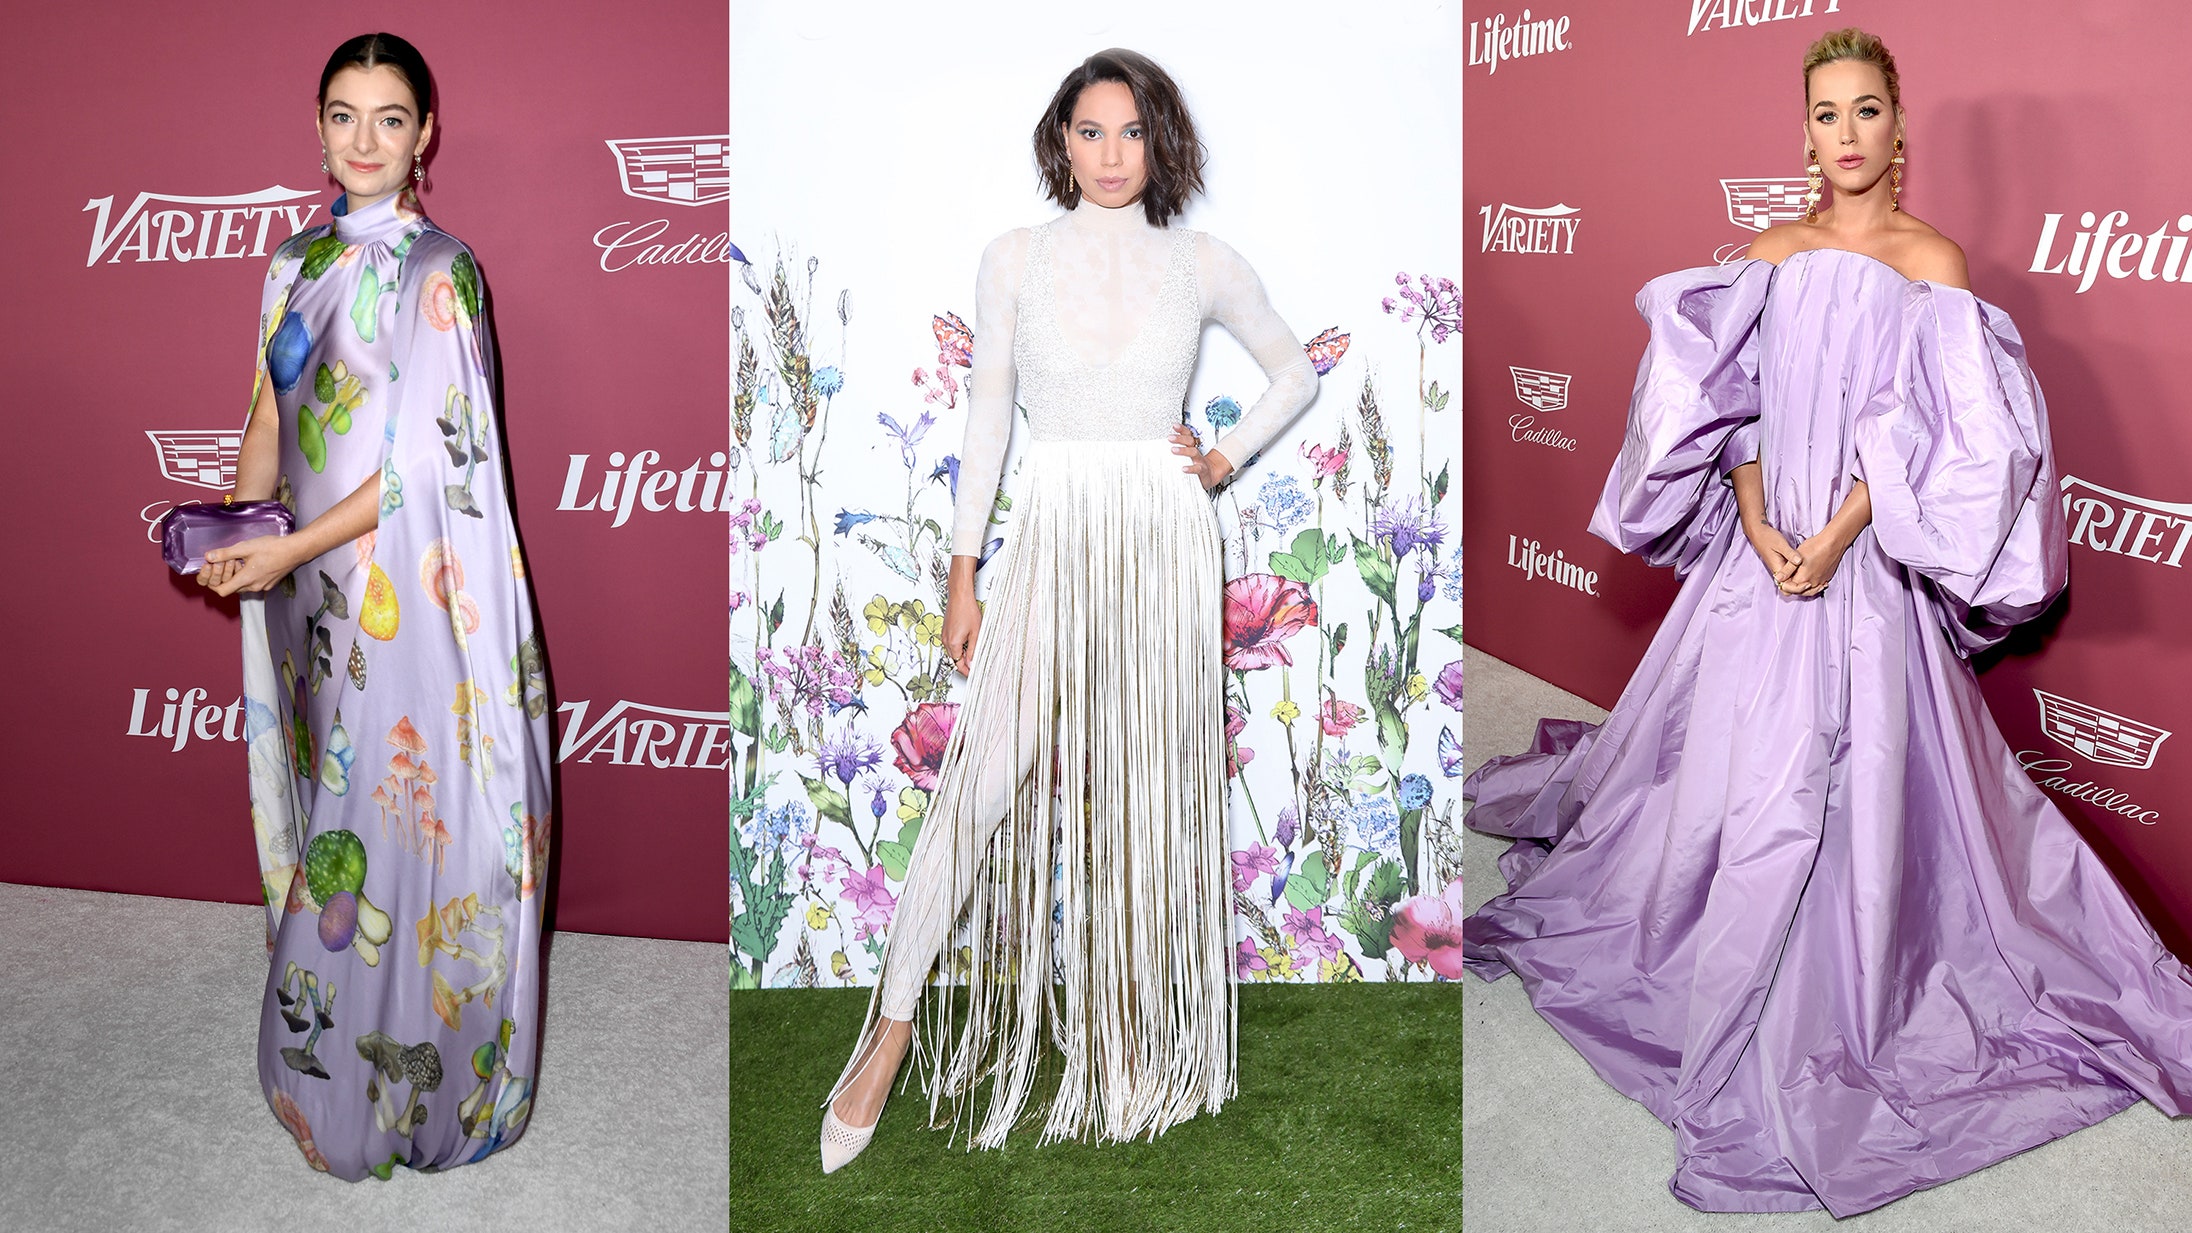 This Week, the Best Dressed Stars Turned Up the Volume